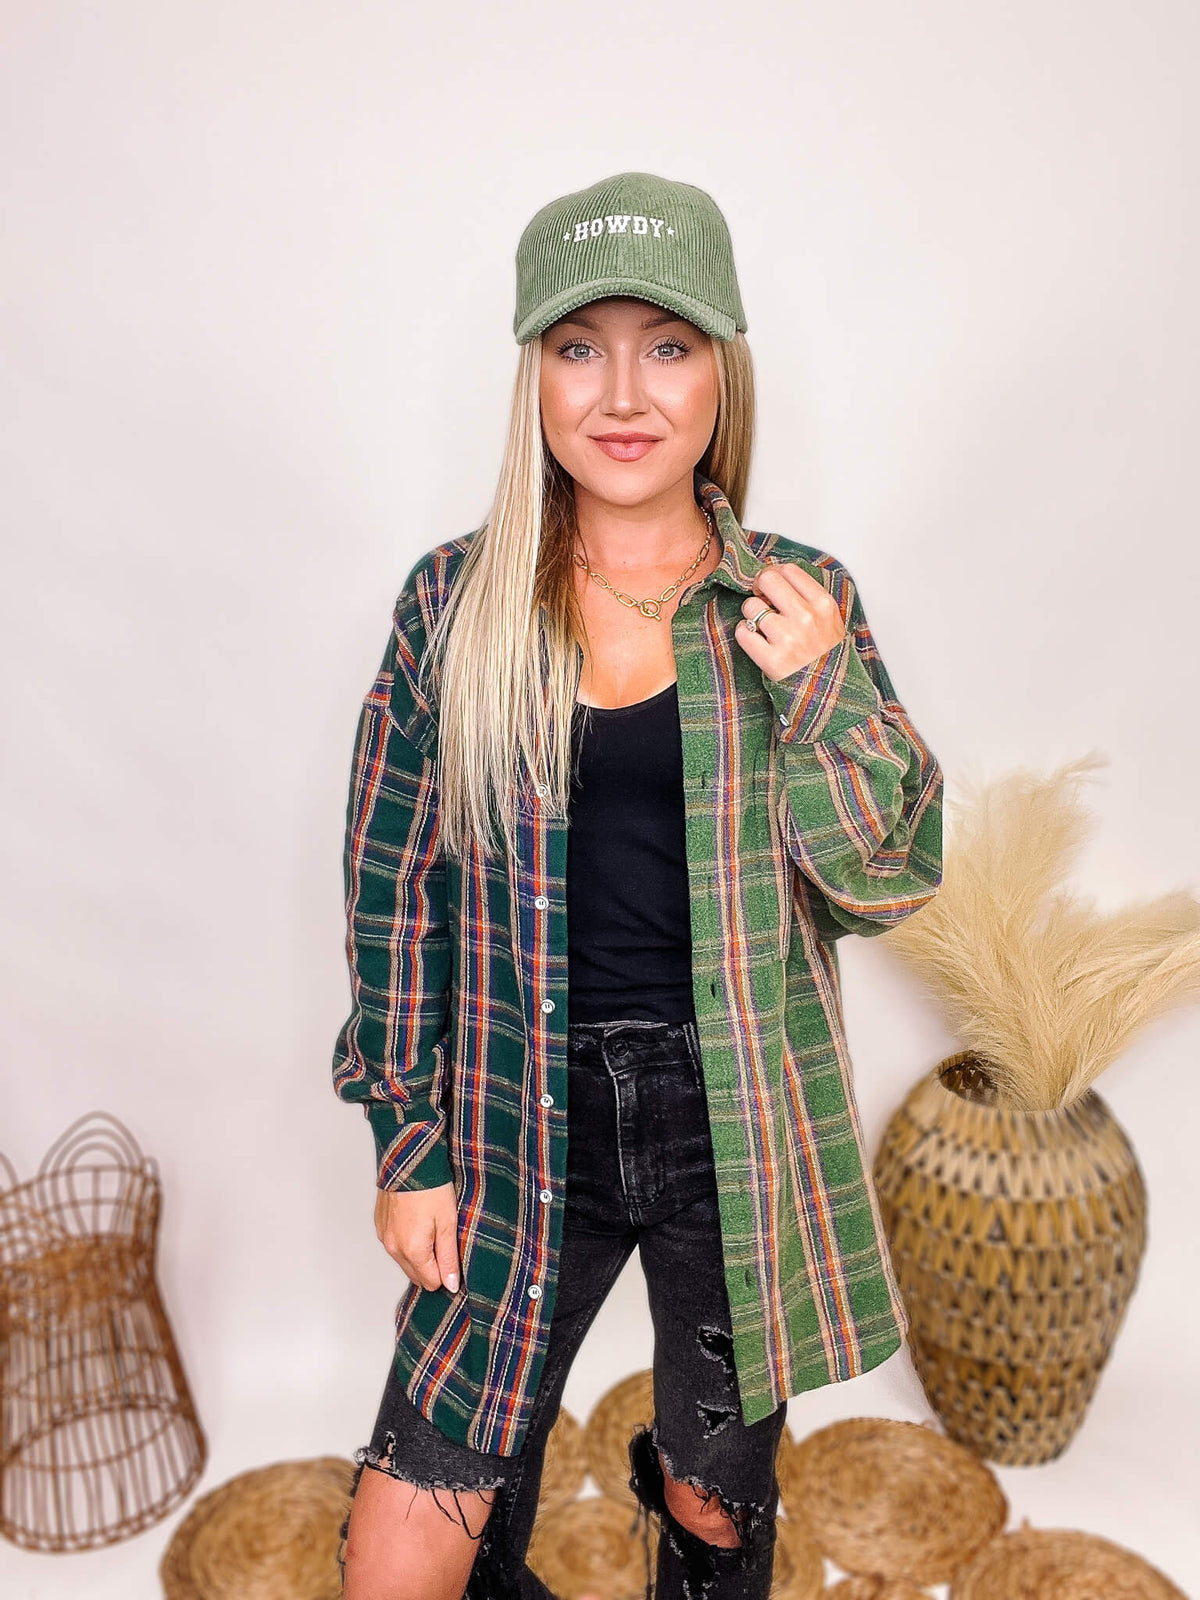 In Loom Two Tone Washed Green Mixed Plaid Long Sleeve Flannel Button Up Front Buttons on Cuffs Oversized Fit 97% Cotton, 3% Spandex Brooke is 5'4 wearing size small.In Loom Two Tone Washed Green Mixed Plaid Long Sleeve Flannel Button Up Front Buttons on Cuffs Oversized Fit 97% Cotton, 3% Spandex Brooke is 5'4 wearing size small.